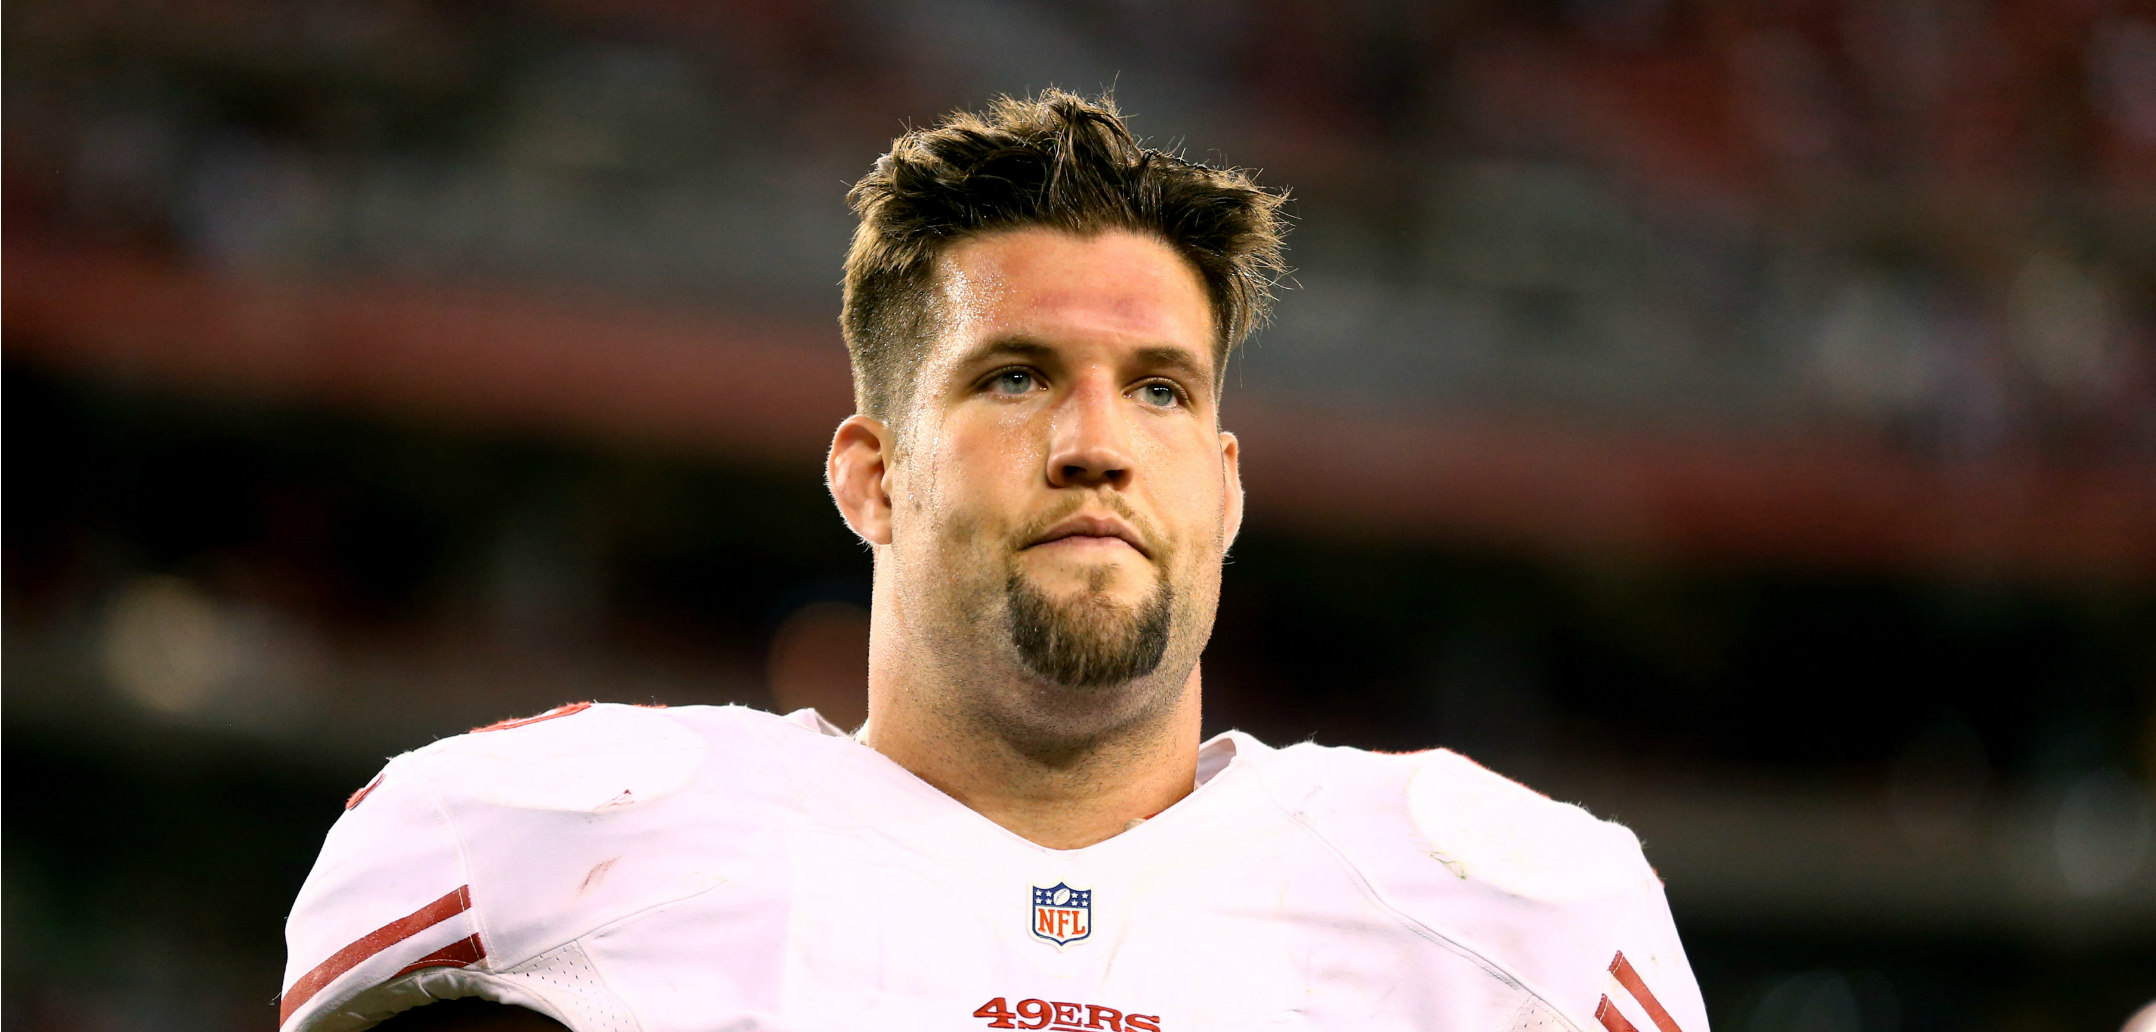 Could San Francisco 49ers Guard' Alex Boone Holdout?